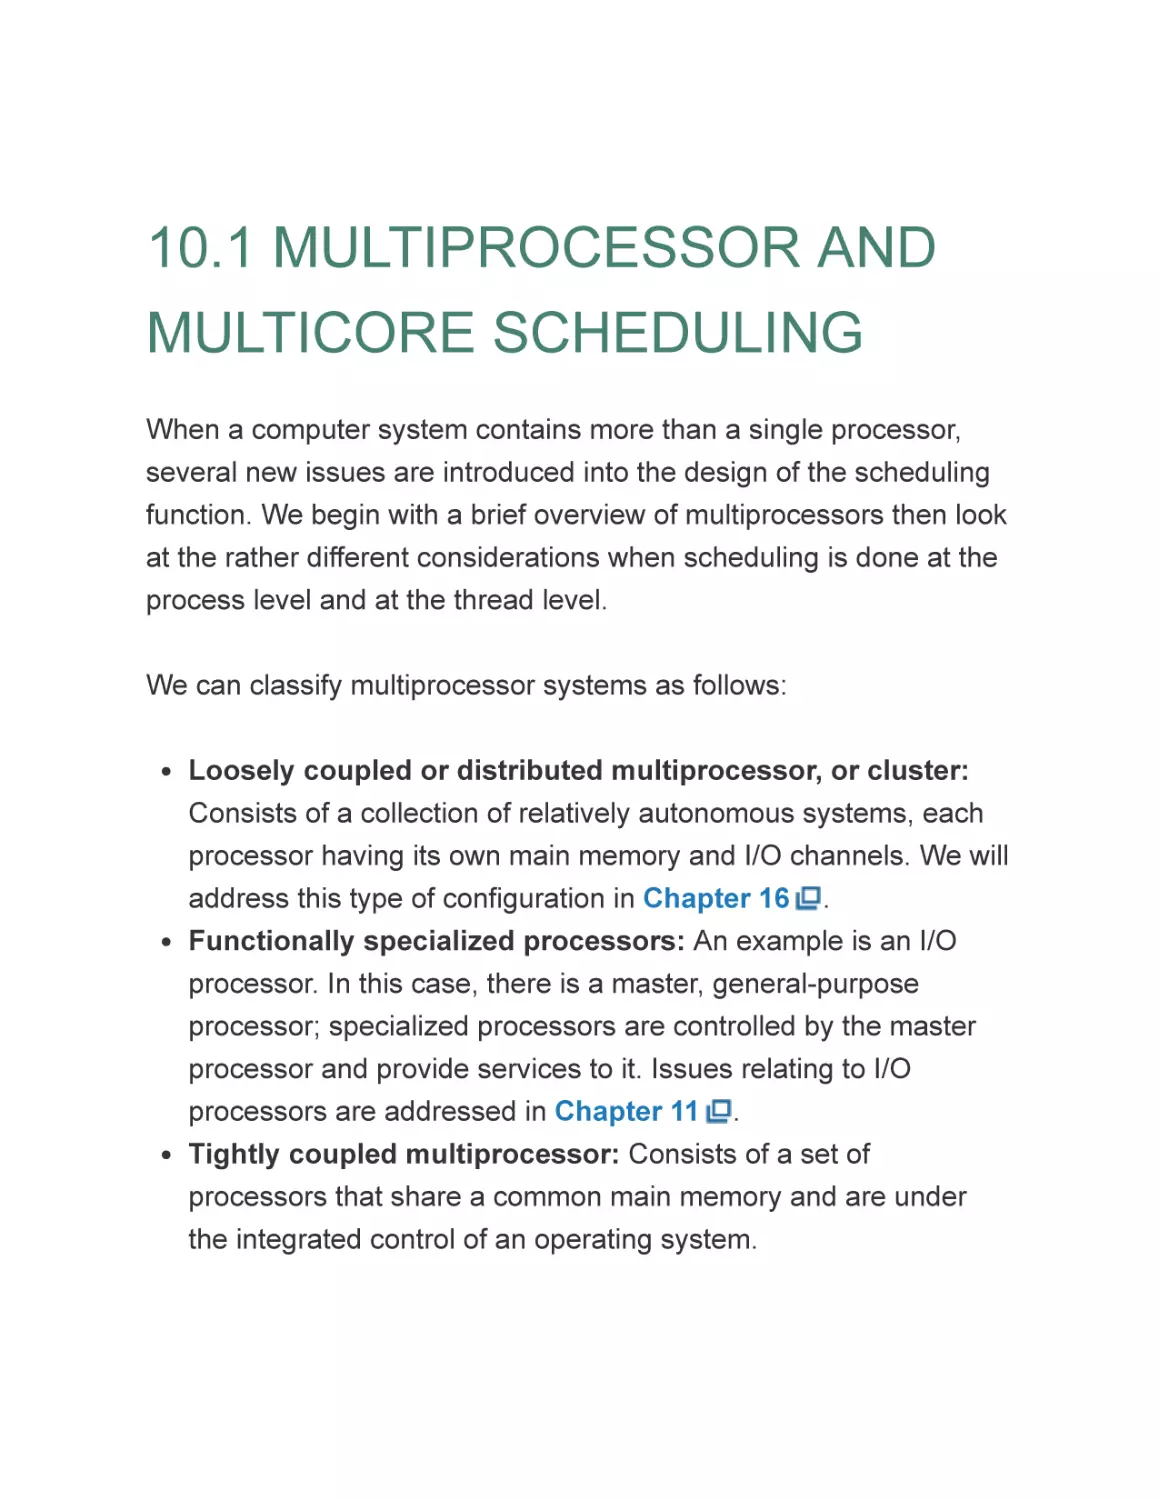 10.1 MULTIPROCESSOR AND MULTICORE SCHEDULING